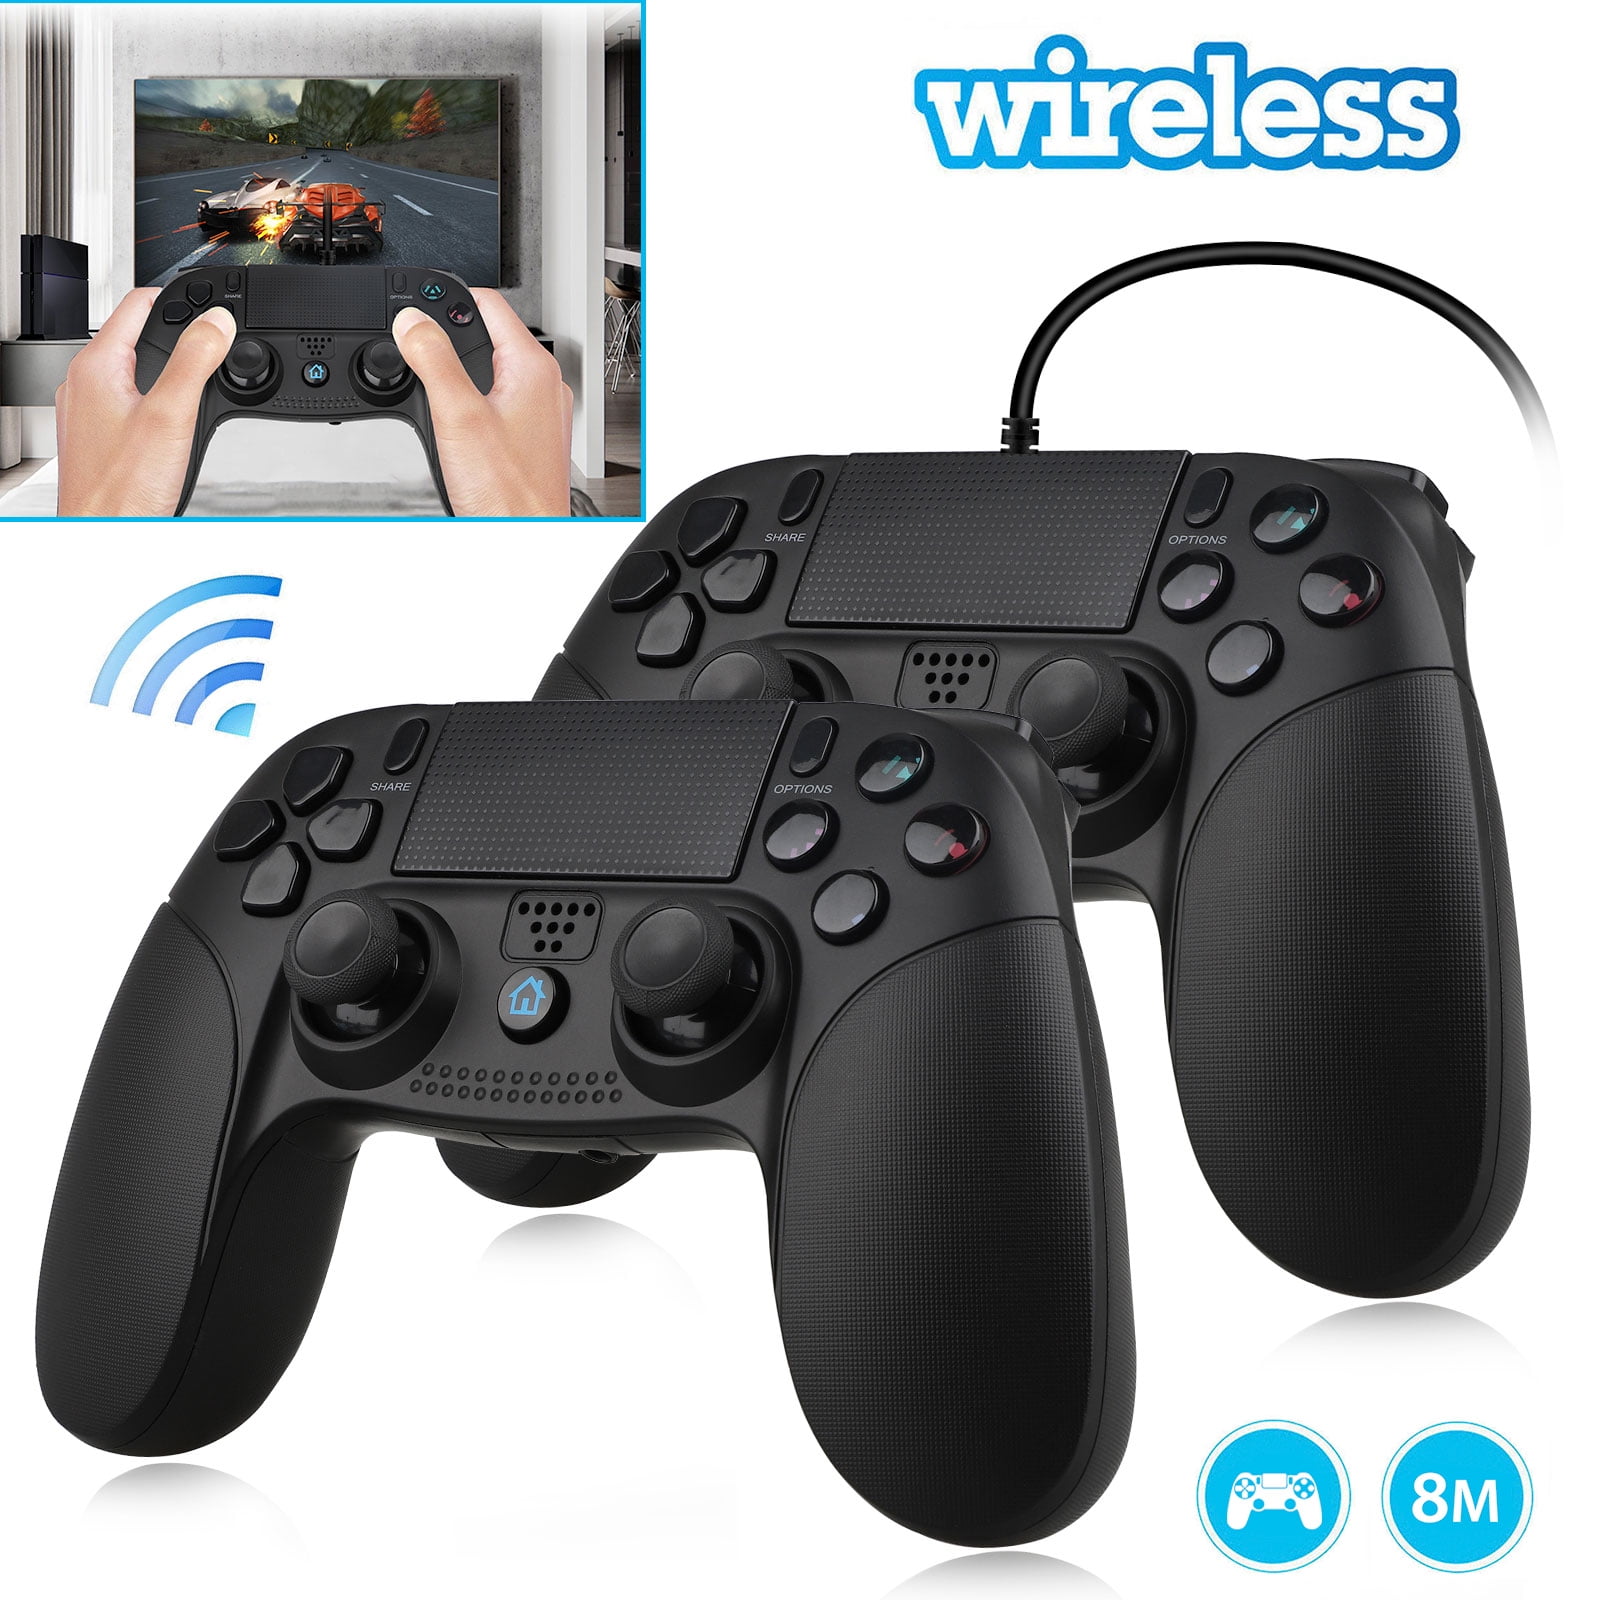 Roblox Android Ps4 Controller Jump - roblox phantom forces ps4 controller